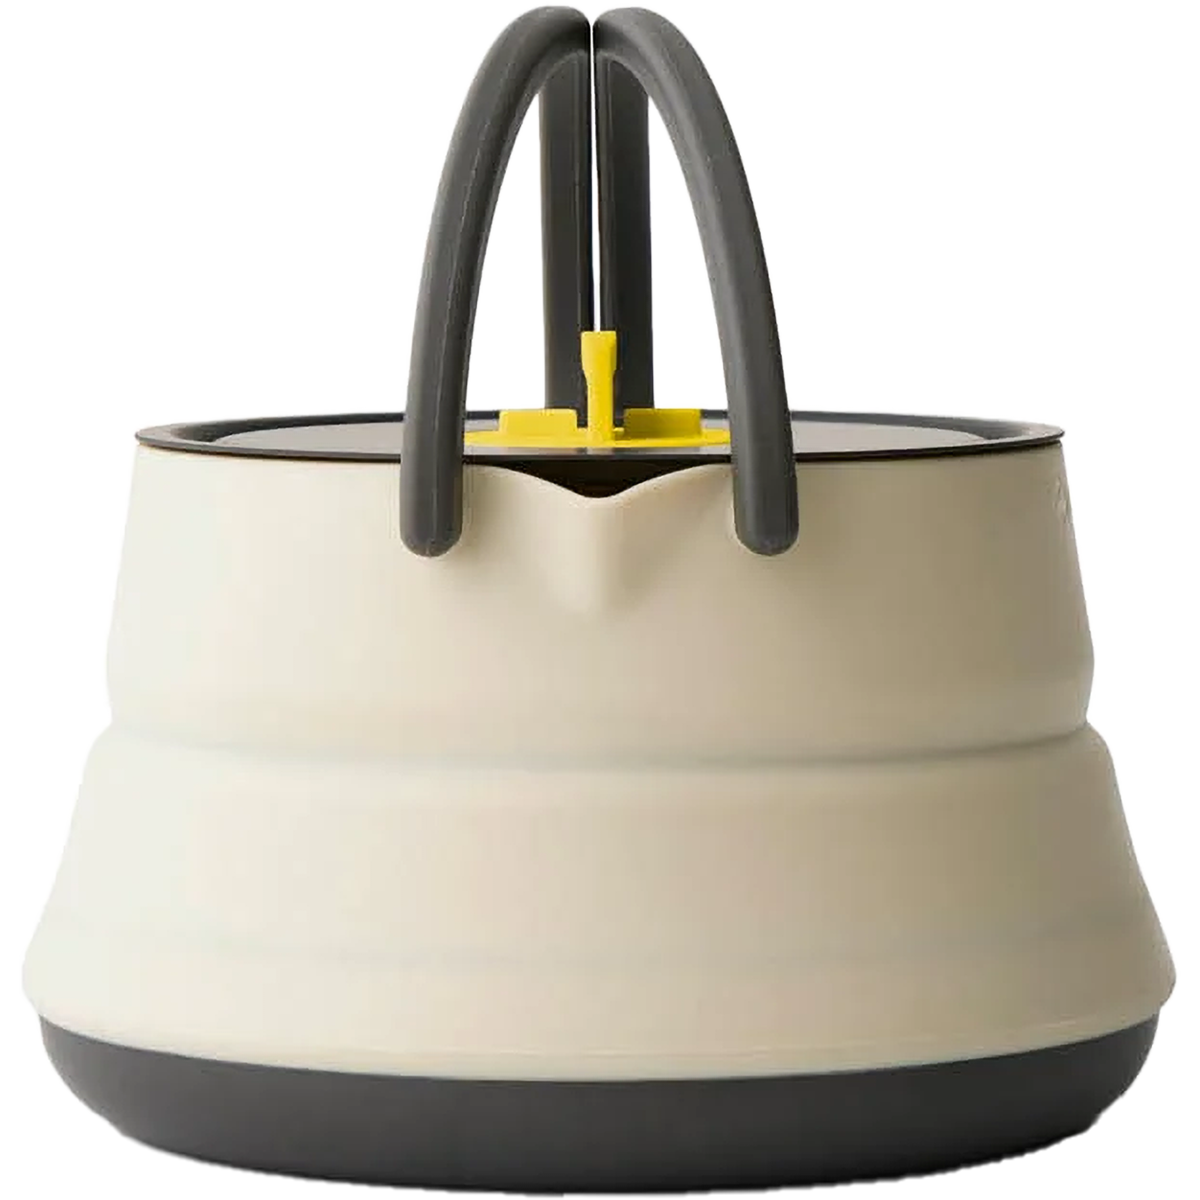 Frontier Ultralight Collapsible Kettle 1.1 L alternate view